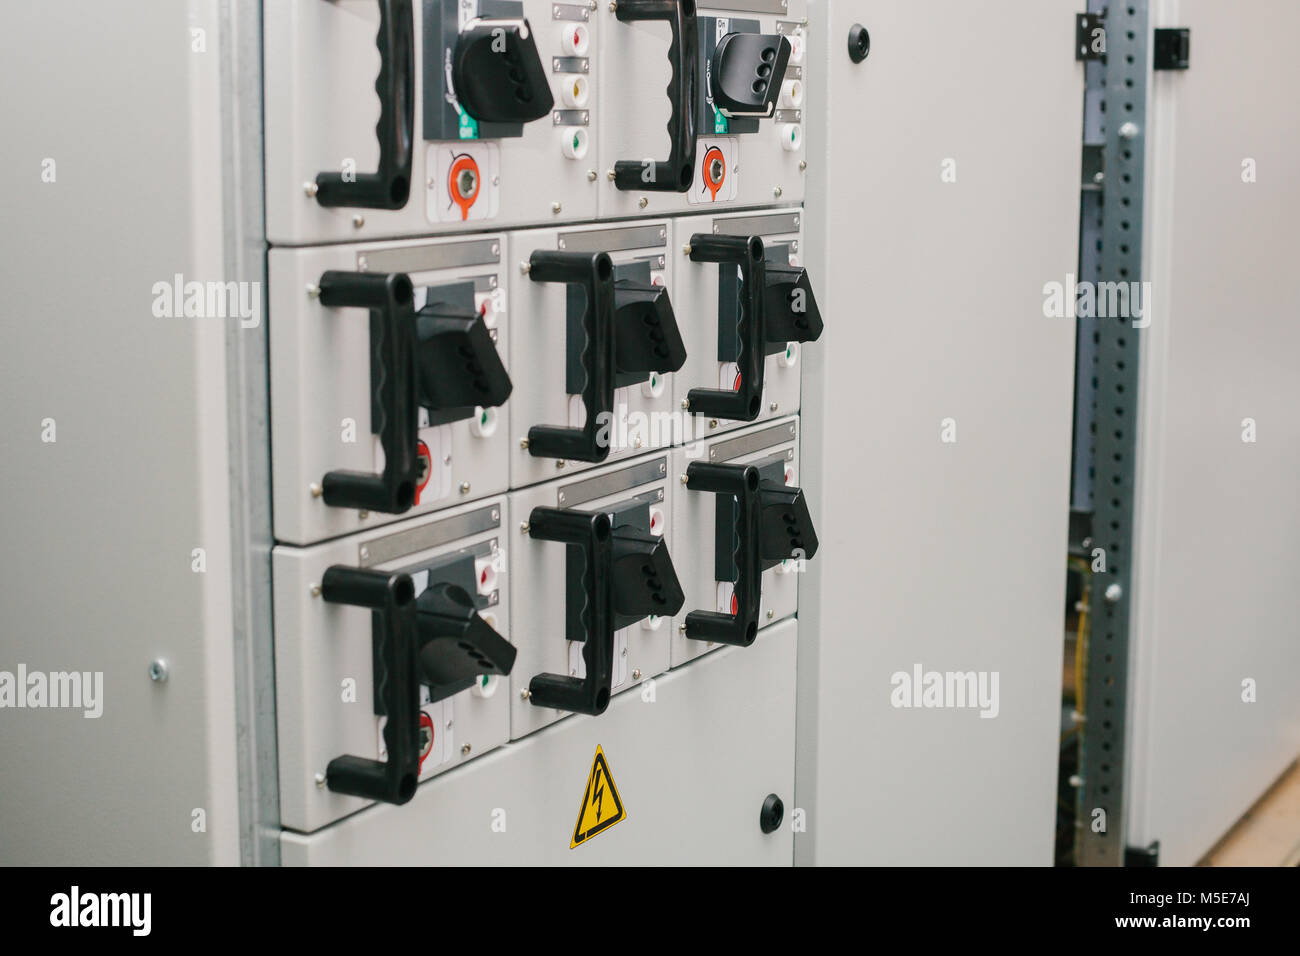 Manufacture of low-voltage cabinets. Modern smart technologies in the electric power industry. The use of electrical energy in industry. Stock Photo